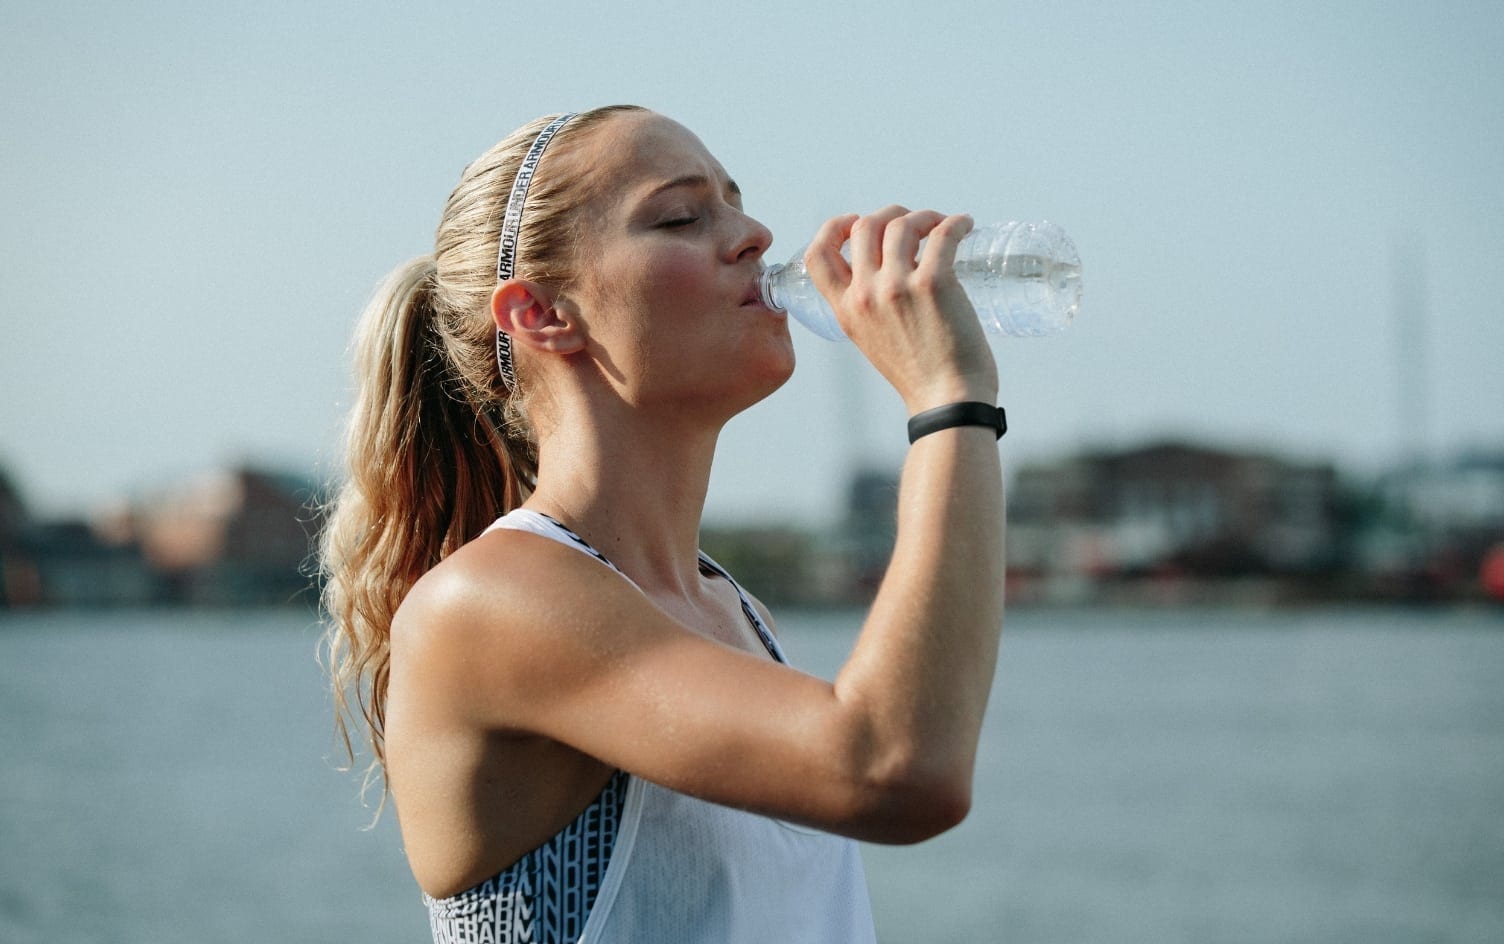 is diet lose mostly water good?